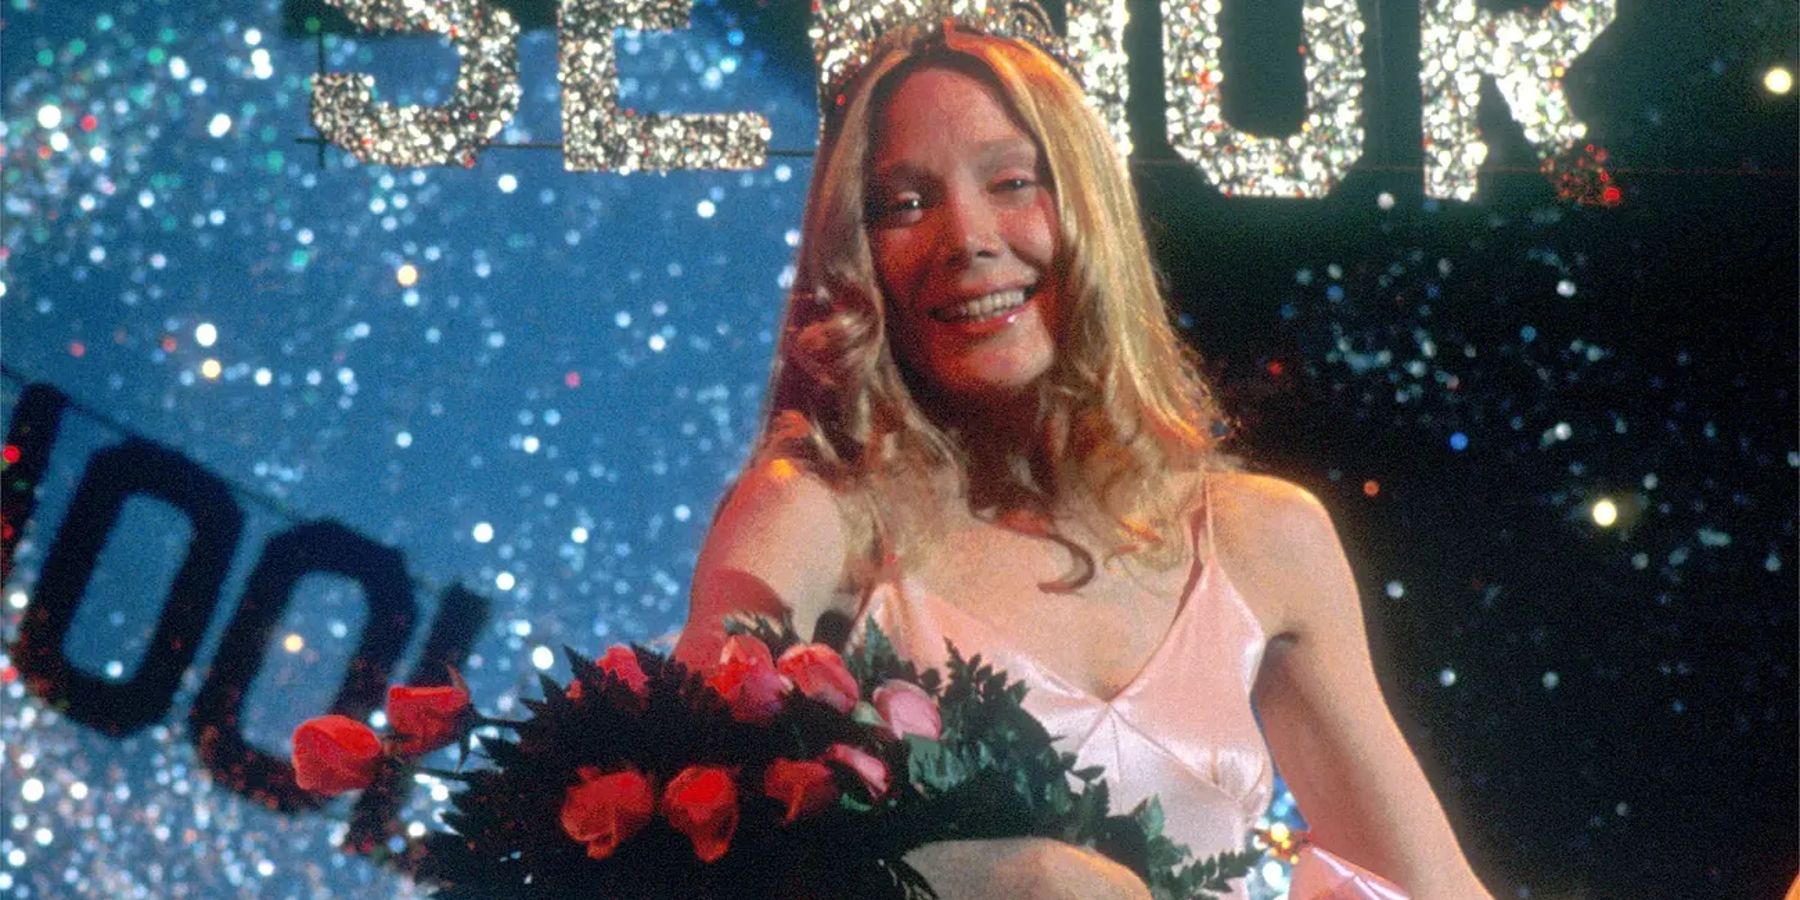 Sissy Spacek holding up flowers at the prom in Carrie (1976)